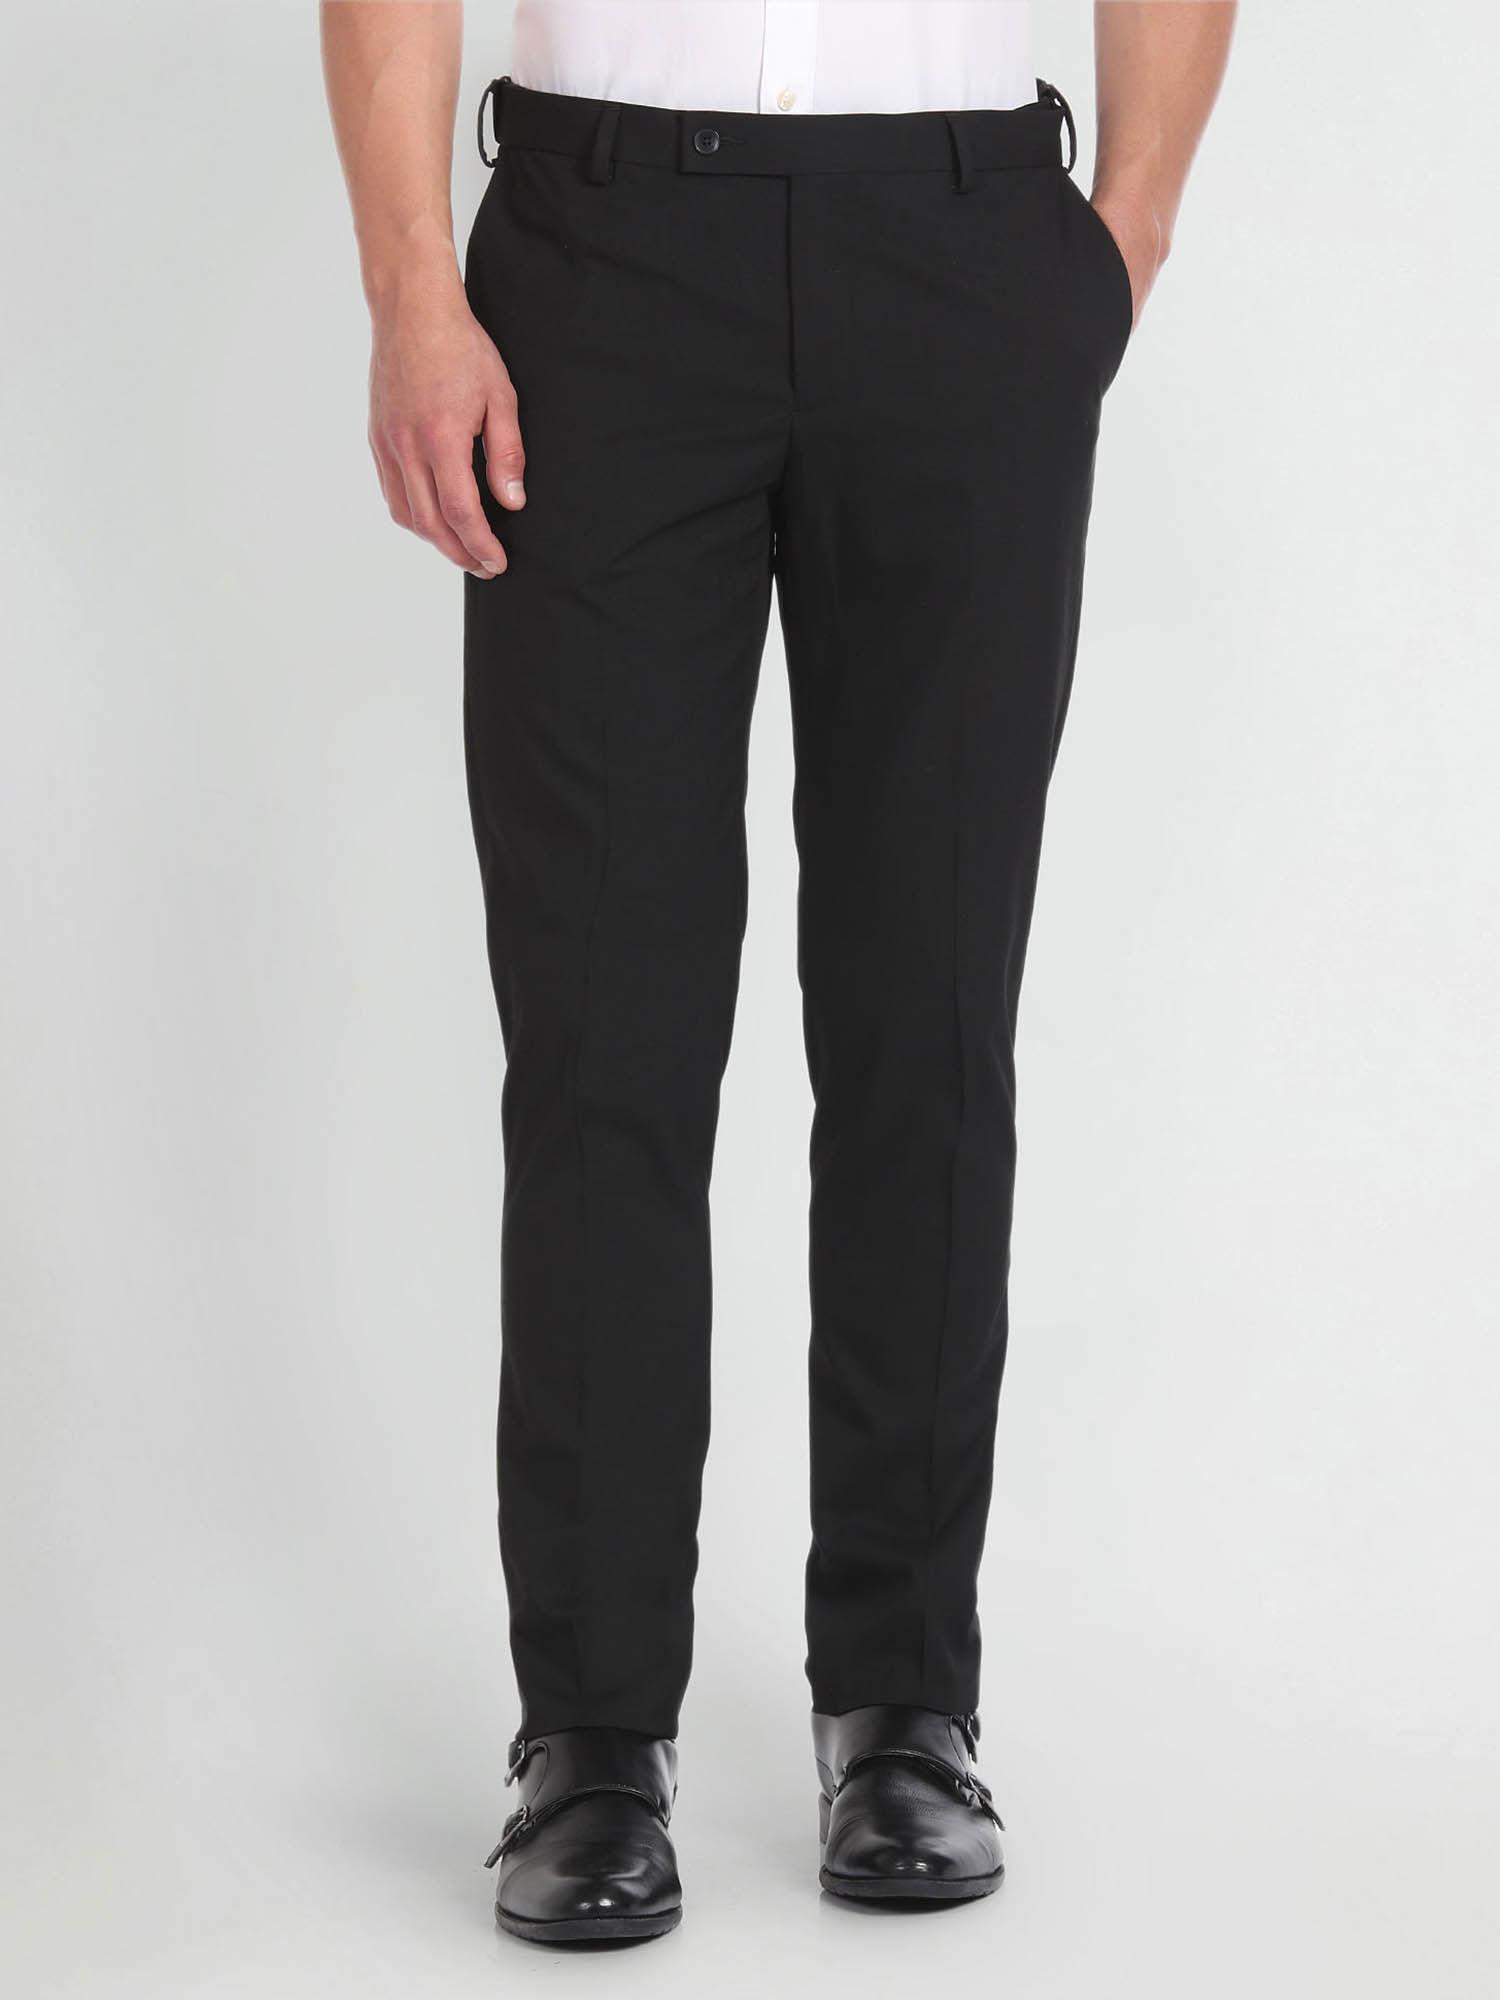 mid-rise-patterned-formal-trousers